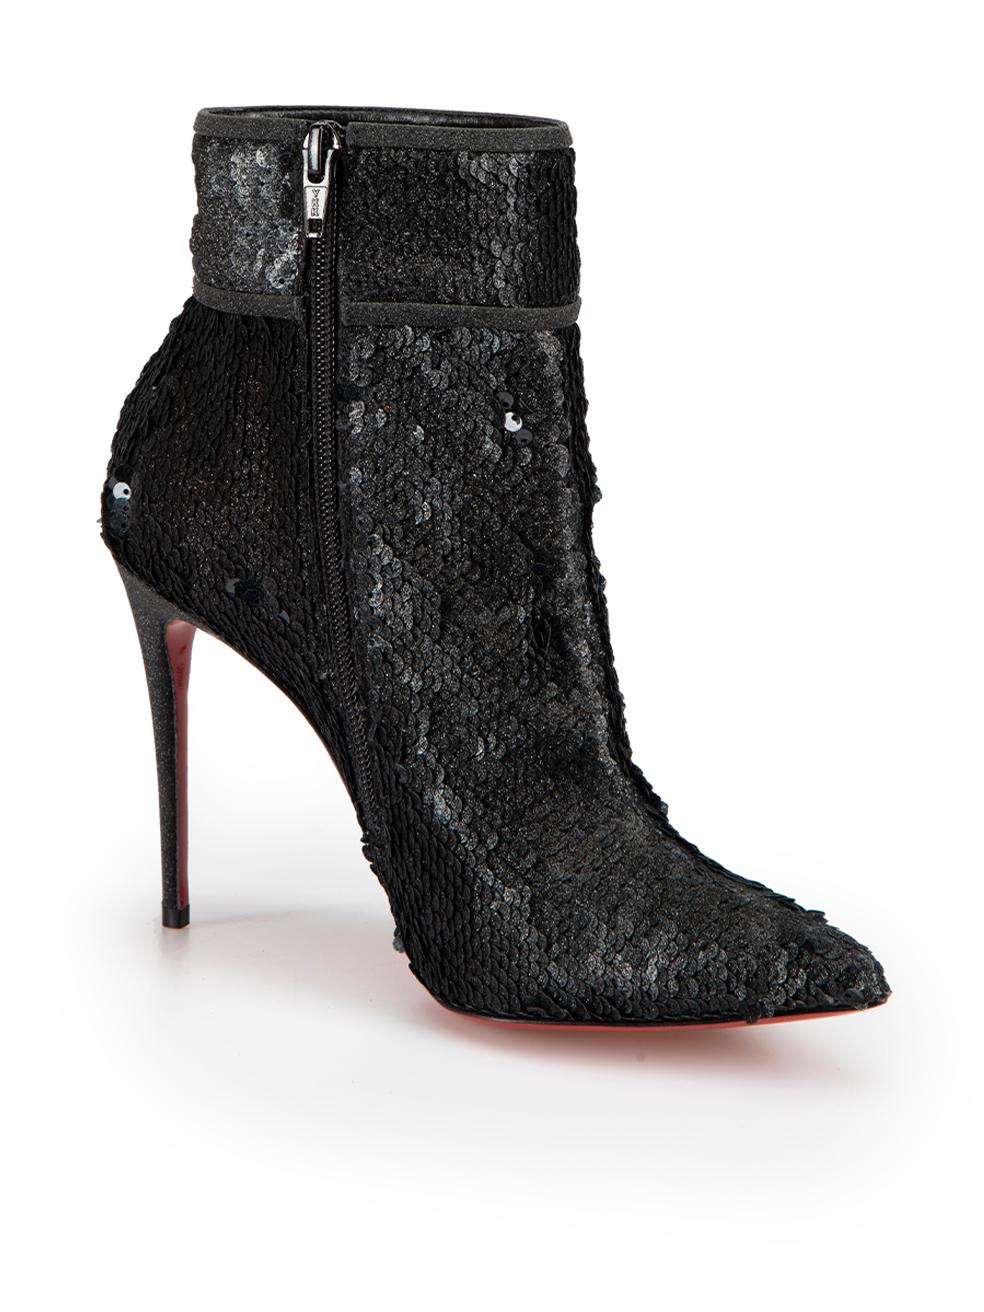 CONDITION is Never Worn. No visible wear to boots is evident on this used Christian Louboutin designer resale item.



Details


Black

Glitter sequinned

Ankle boots

High heeled

Side zip fastening 



 

Made in Italy 

 

Composition

EXTERIOR: